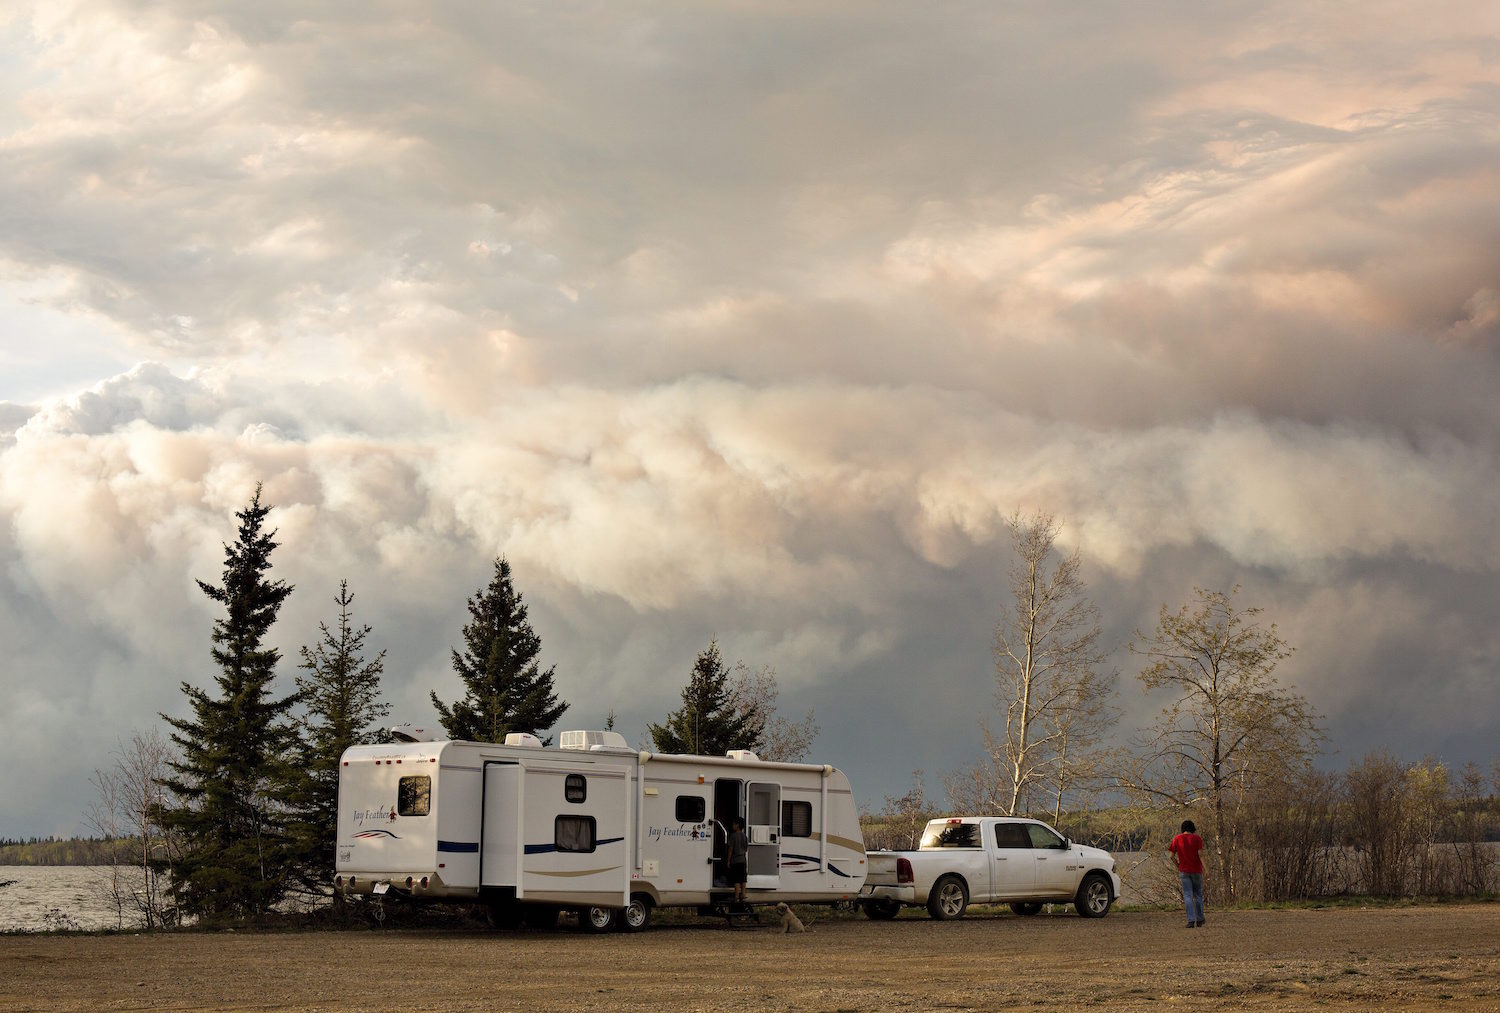 Evacuees camp by a lake as smoke fills the sky near Fort McMurray, Alberta, on Wednesday, May 4, 2016. Alberta declared a state of emergency Wednesday as crews frantically held back wind-whipped wildfires. No injuries or fatalities have been reported. (Jason Franson/The Canadian Press via AP) MANDATORY CREDIT